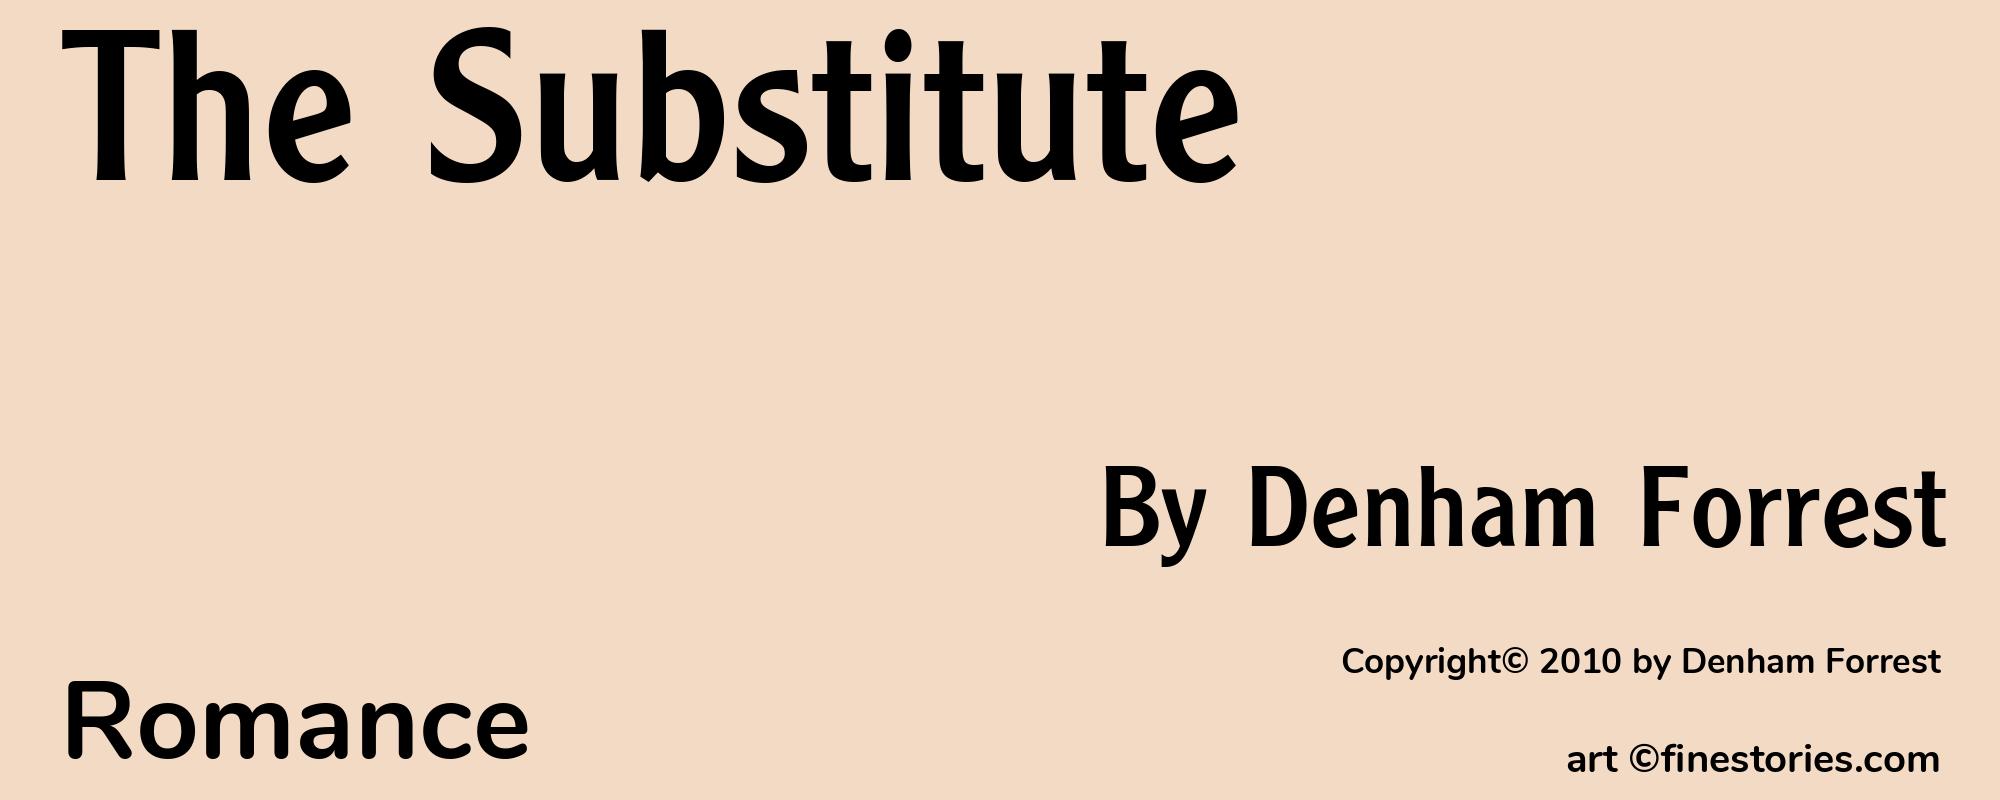 The Substitute - Cover